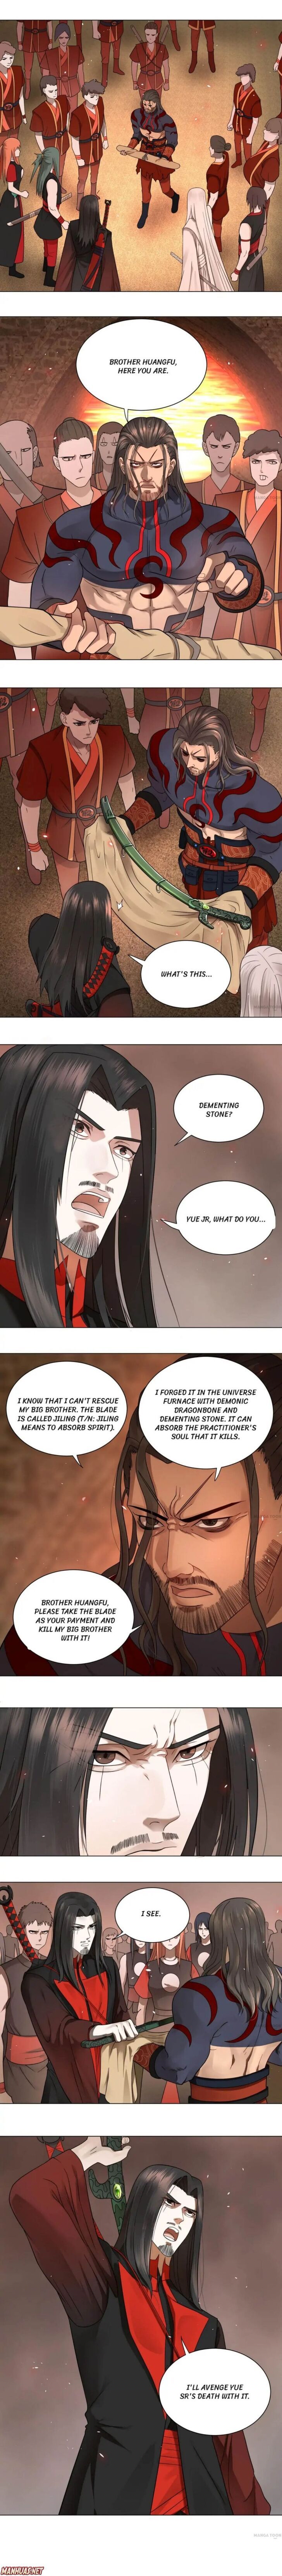 My Three Thousand Years to the Sky Chapter 068 page 6